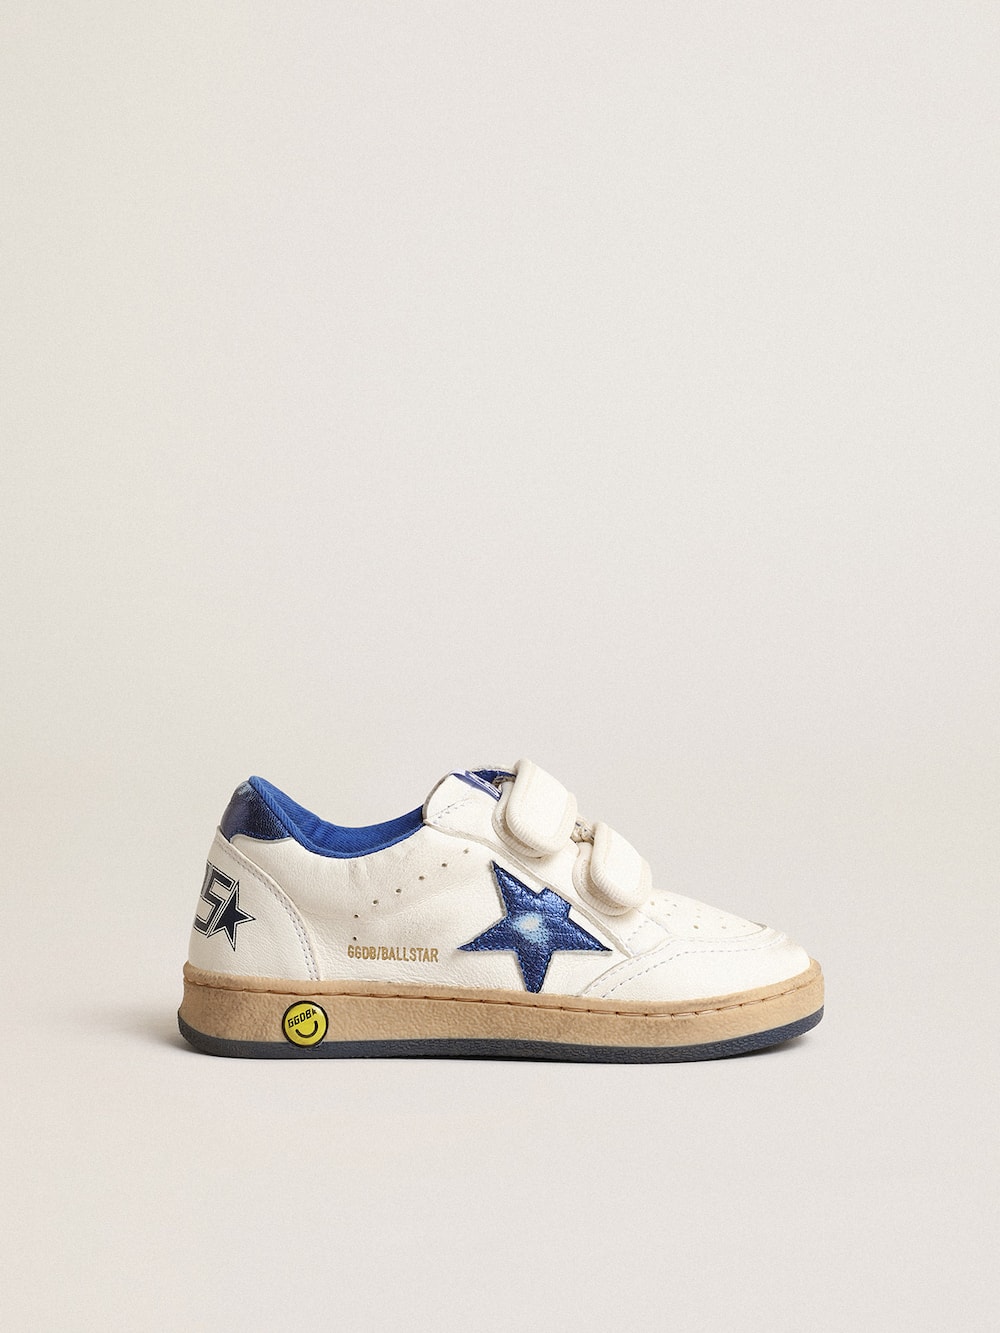 Golden Goose - Ball Star Junior with blue metallic leather star and heel tab in 